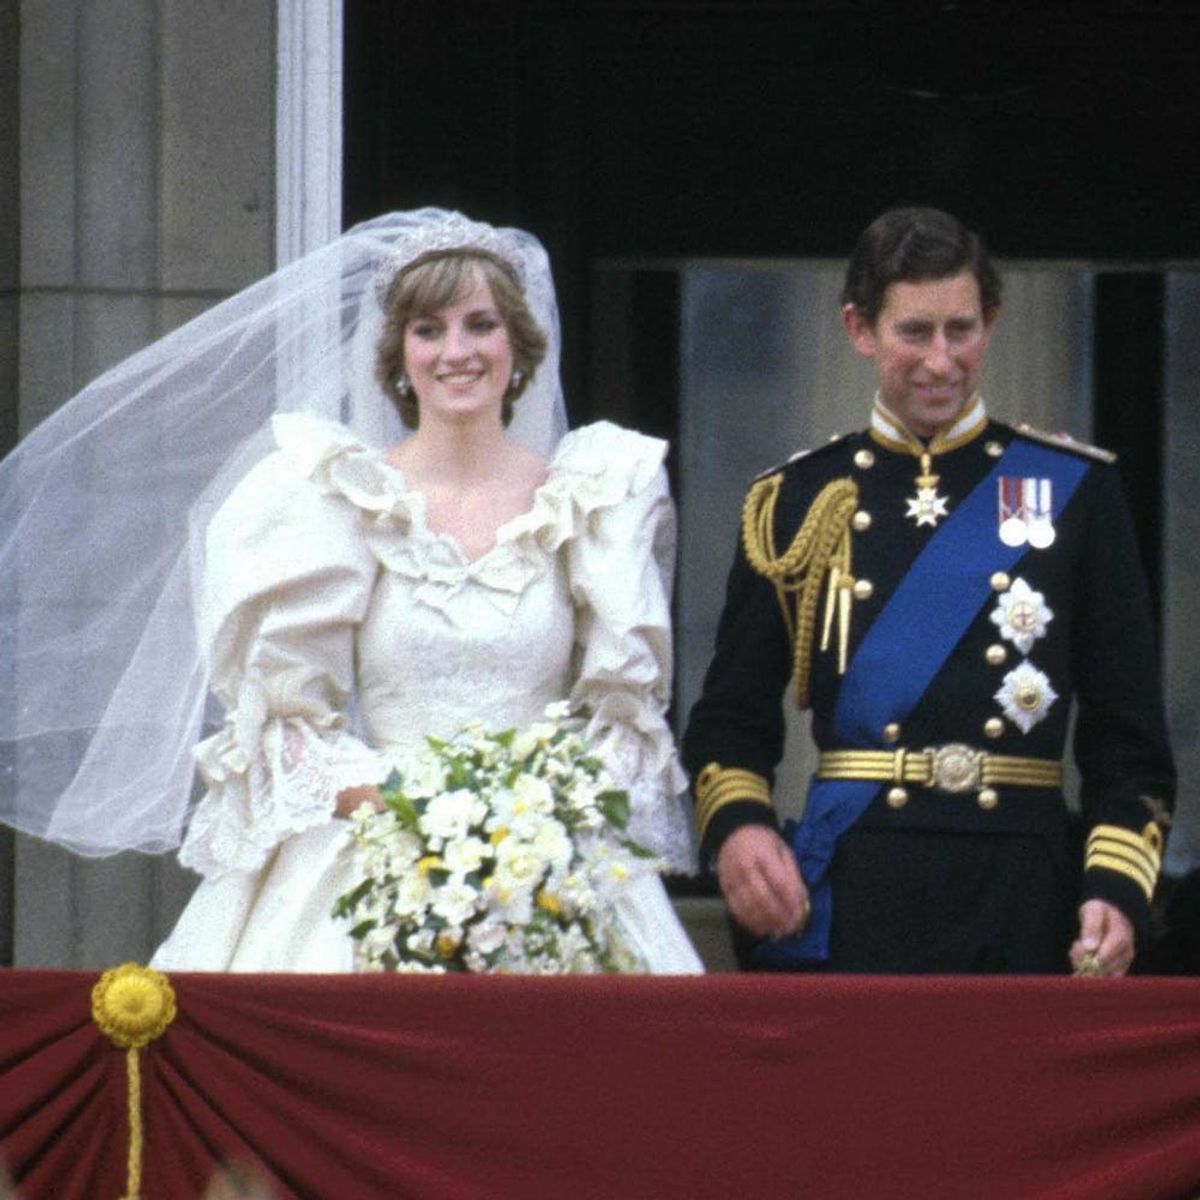 This Man Has a 36-Year-Old Piece of Cake from Princess Diana and Prince Charles’ Wedding